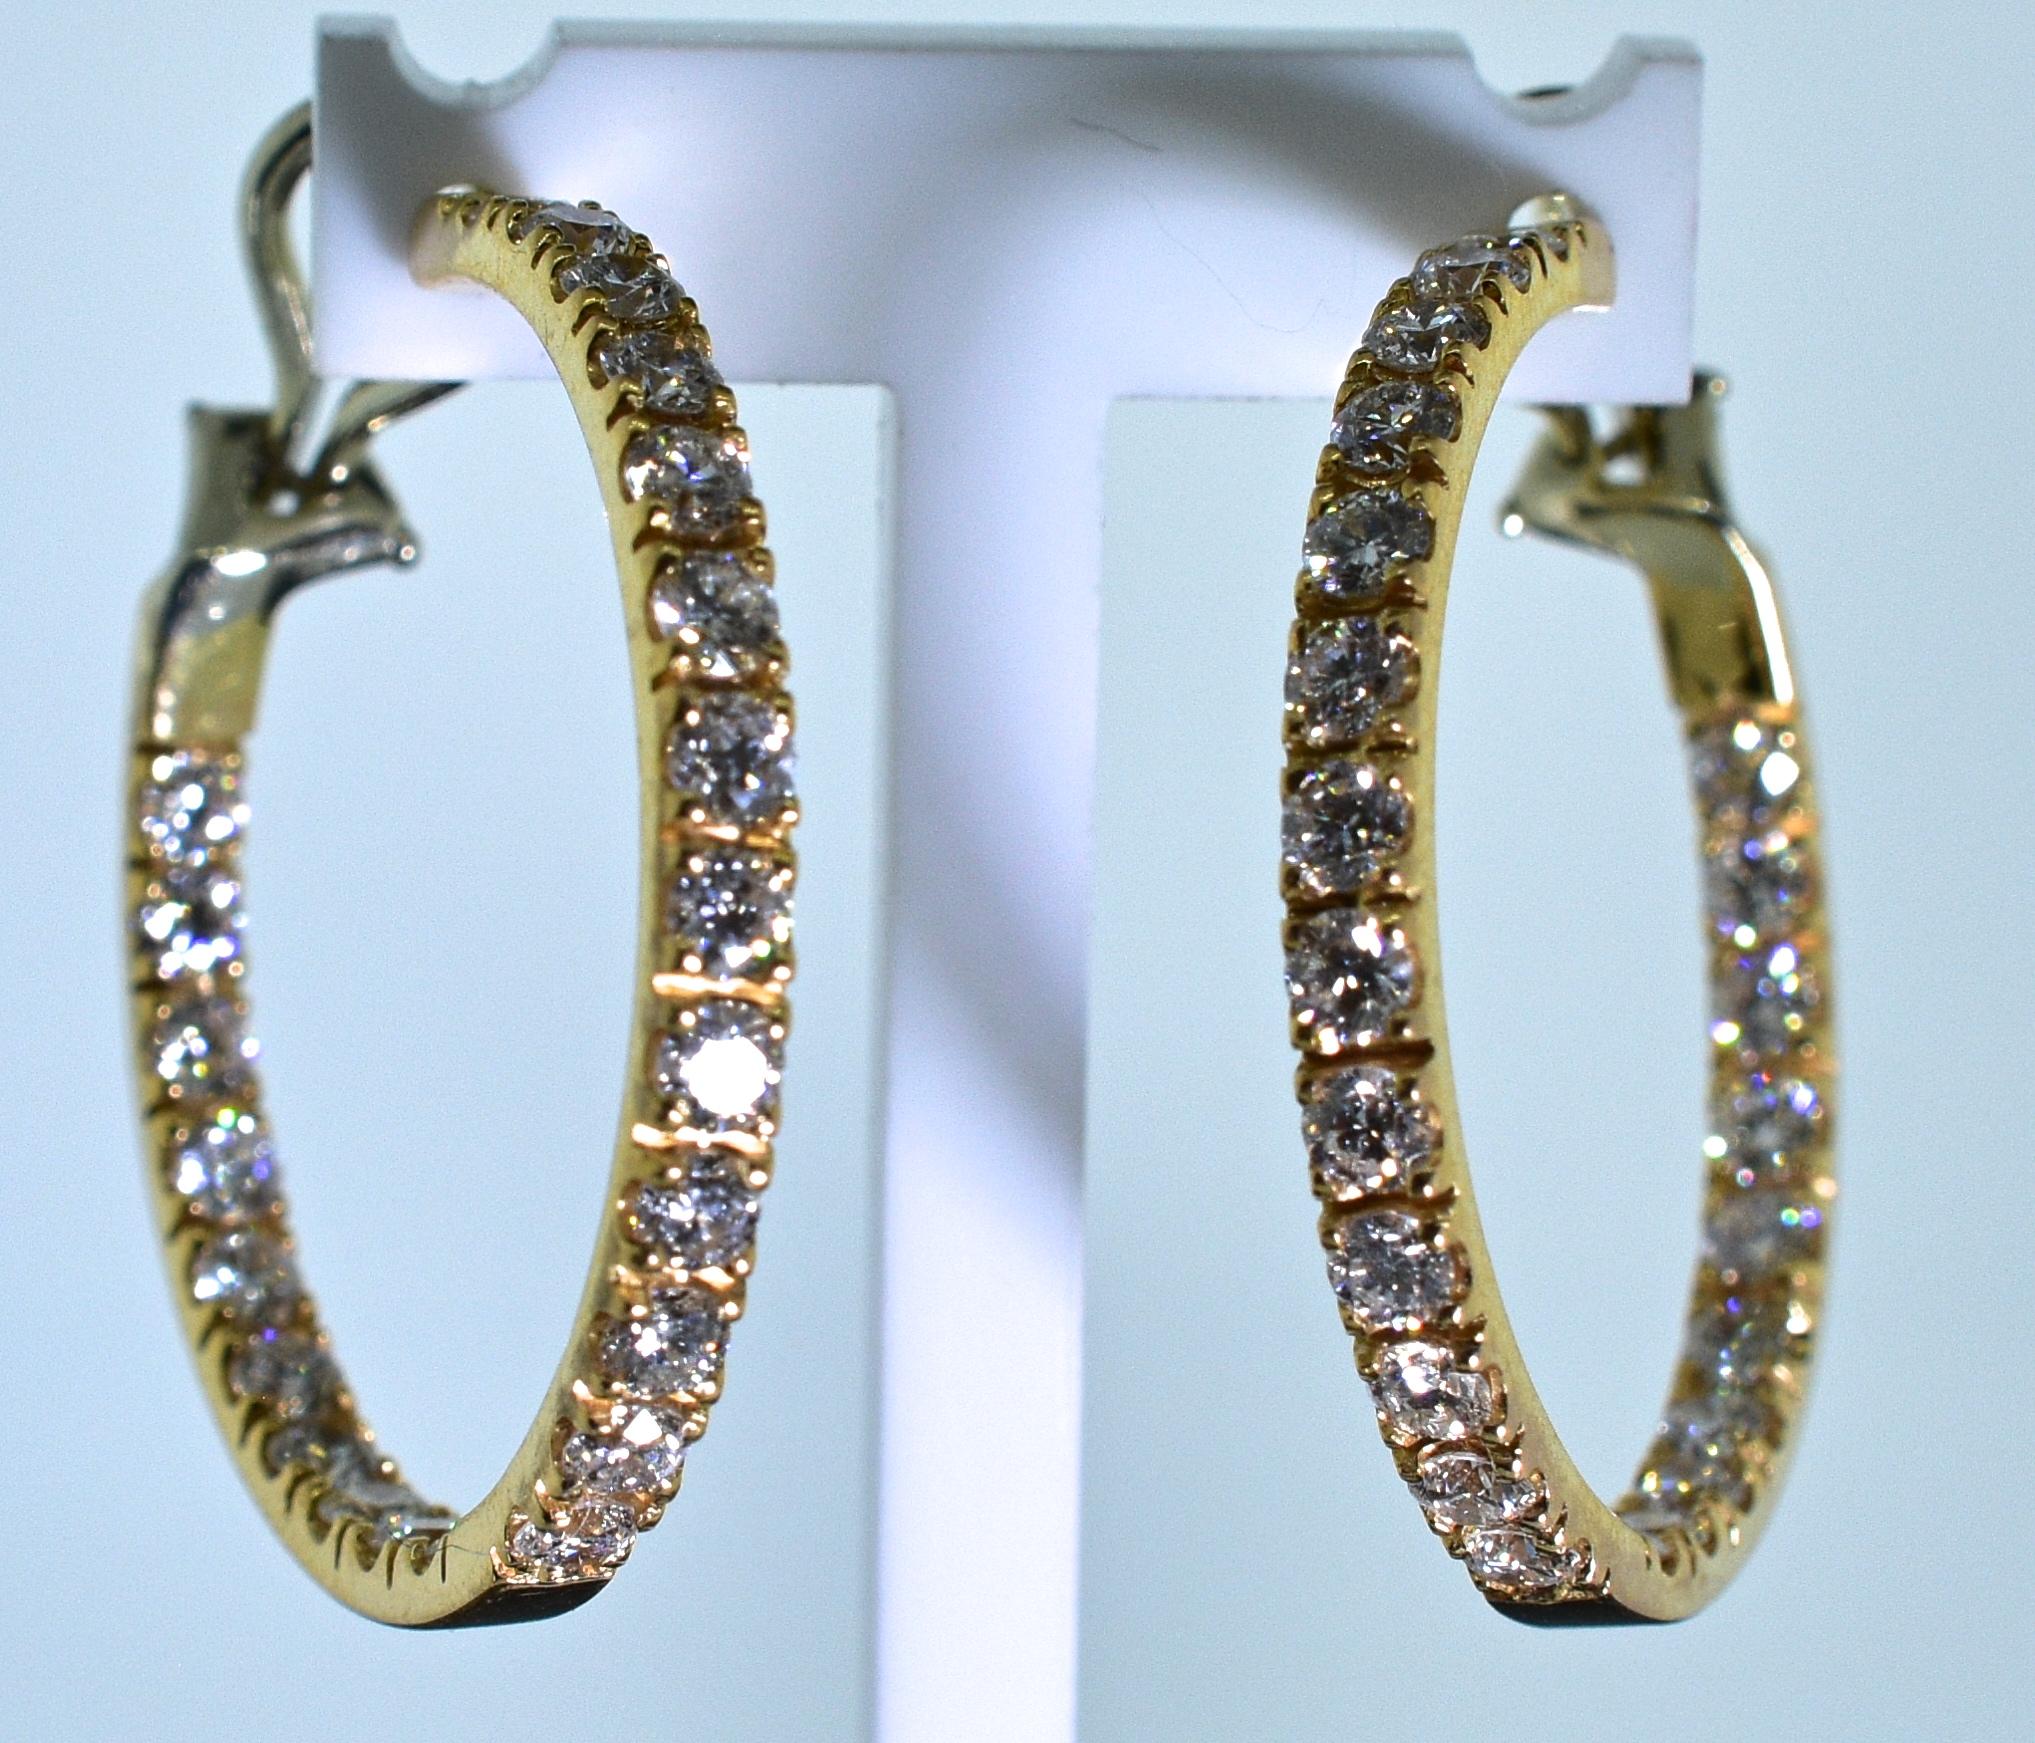 18K pink gold and diamond medium size hoops with 46 fine white round brilliant cut diamonds amounting to approximately 2.75 cts.  These 